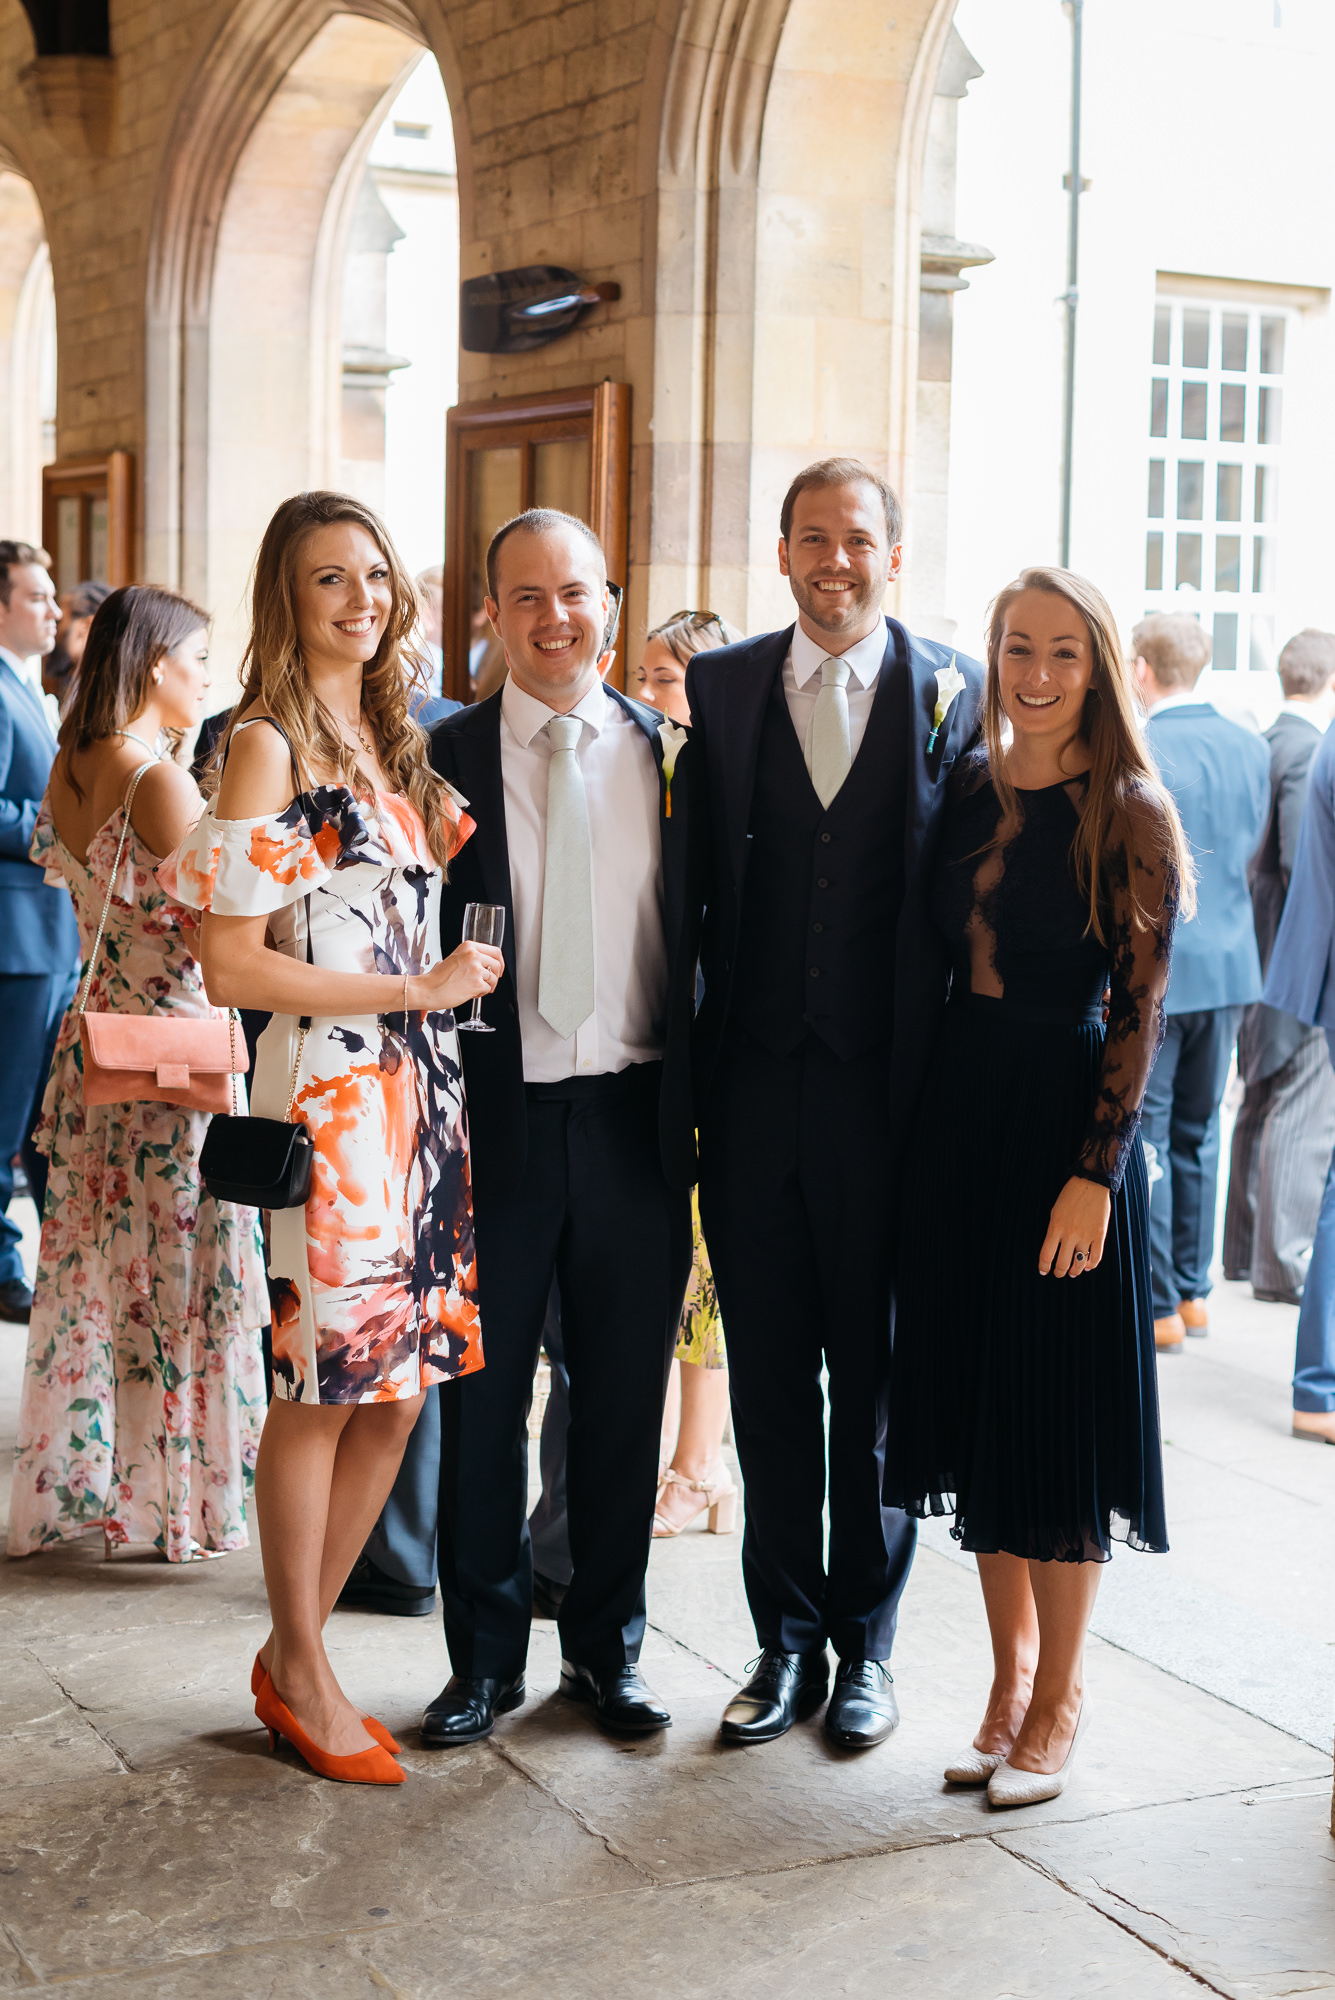 Wedding guests at Cloisters in Oundle